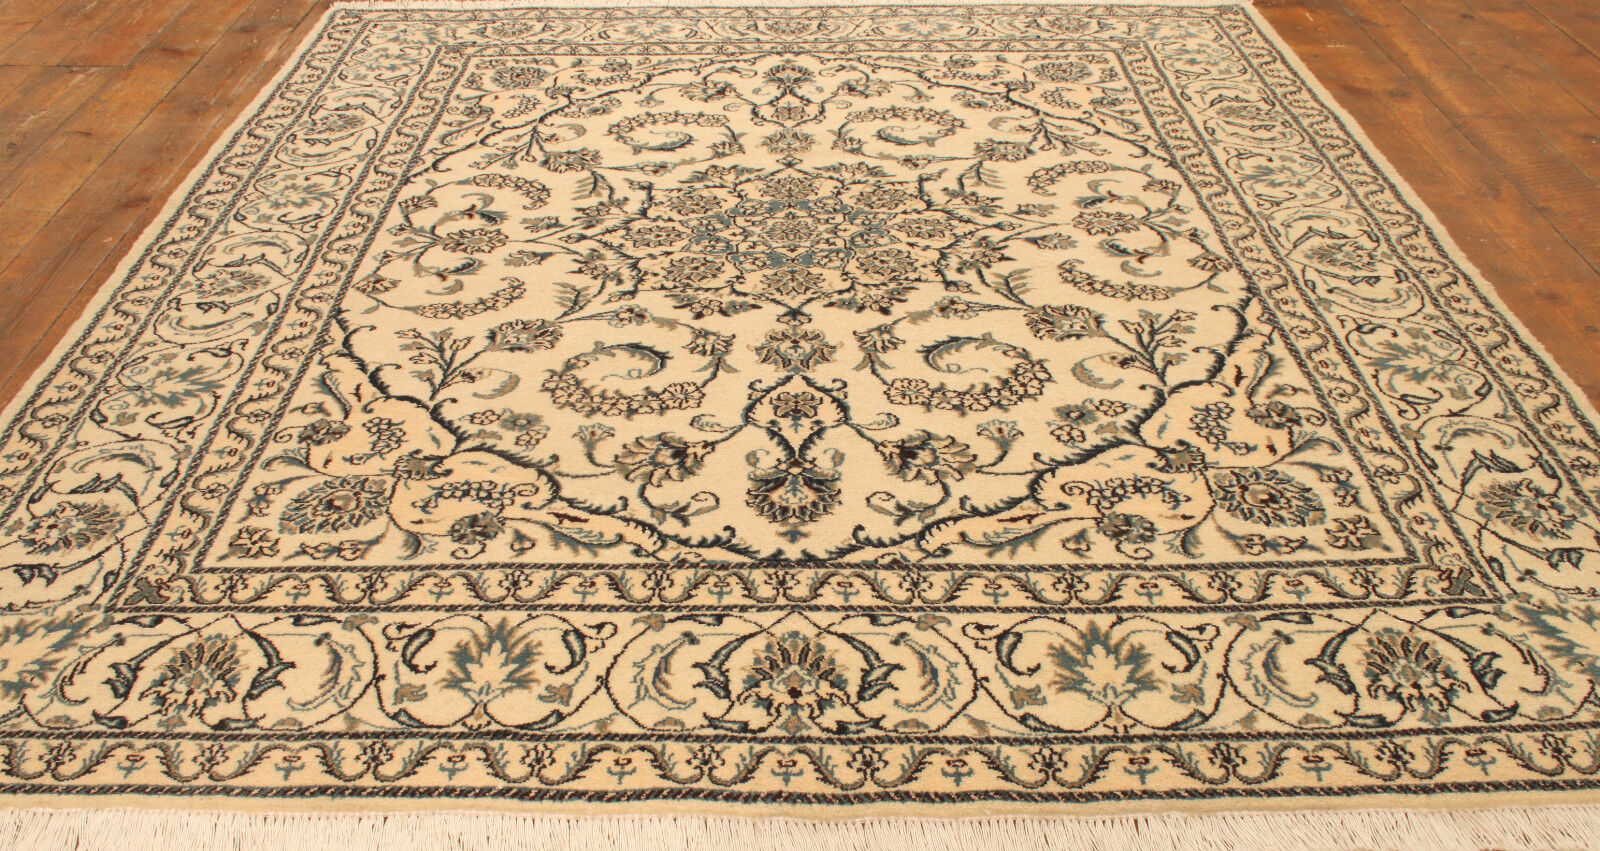 Side view of the Handmade Contemporary Persian Nain Rug demonstrating texture